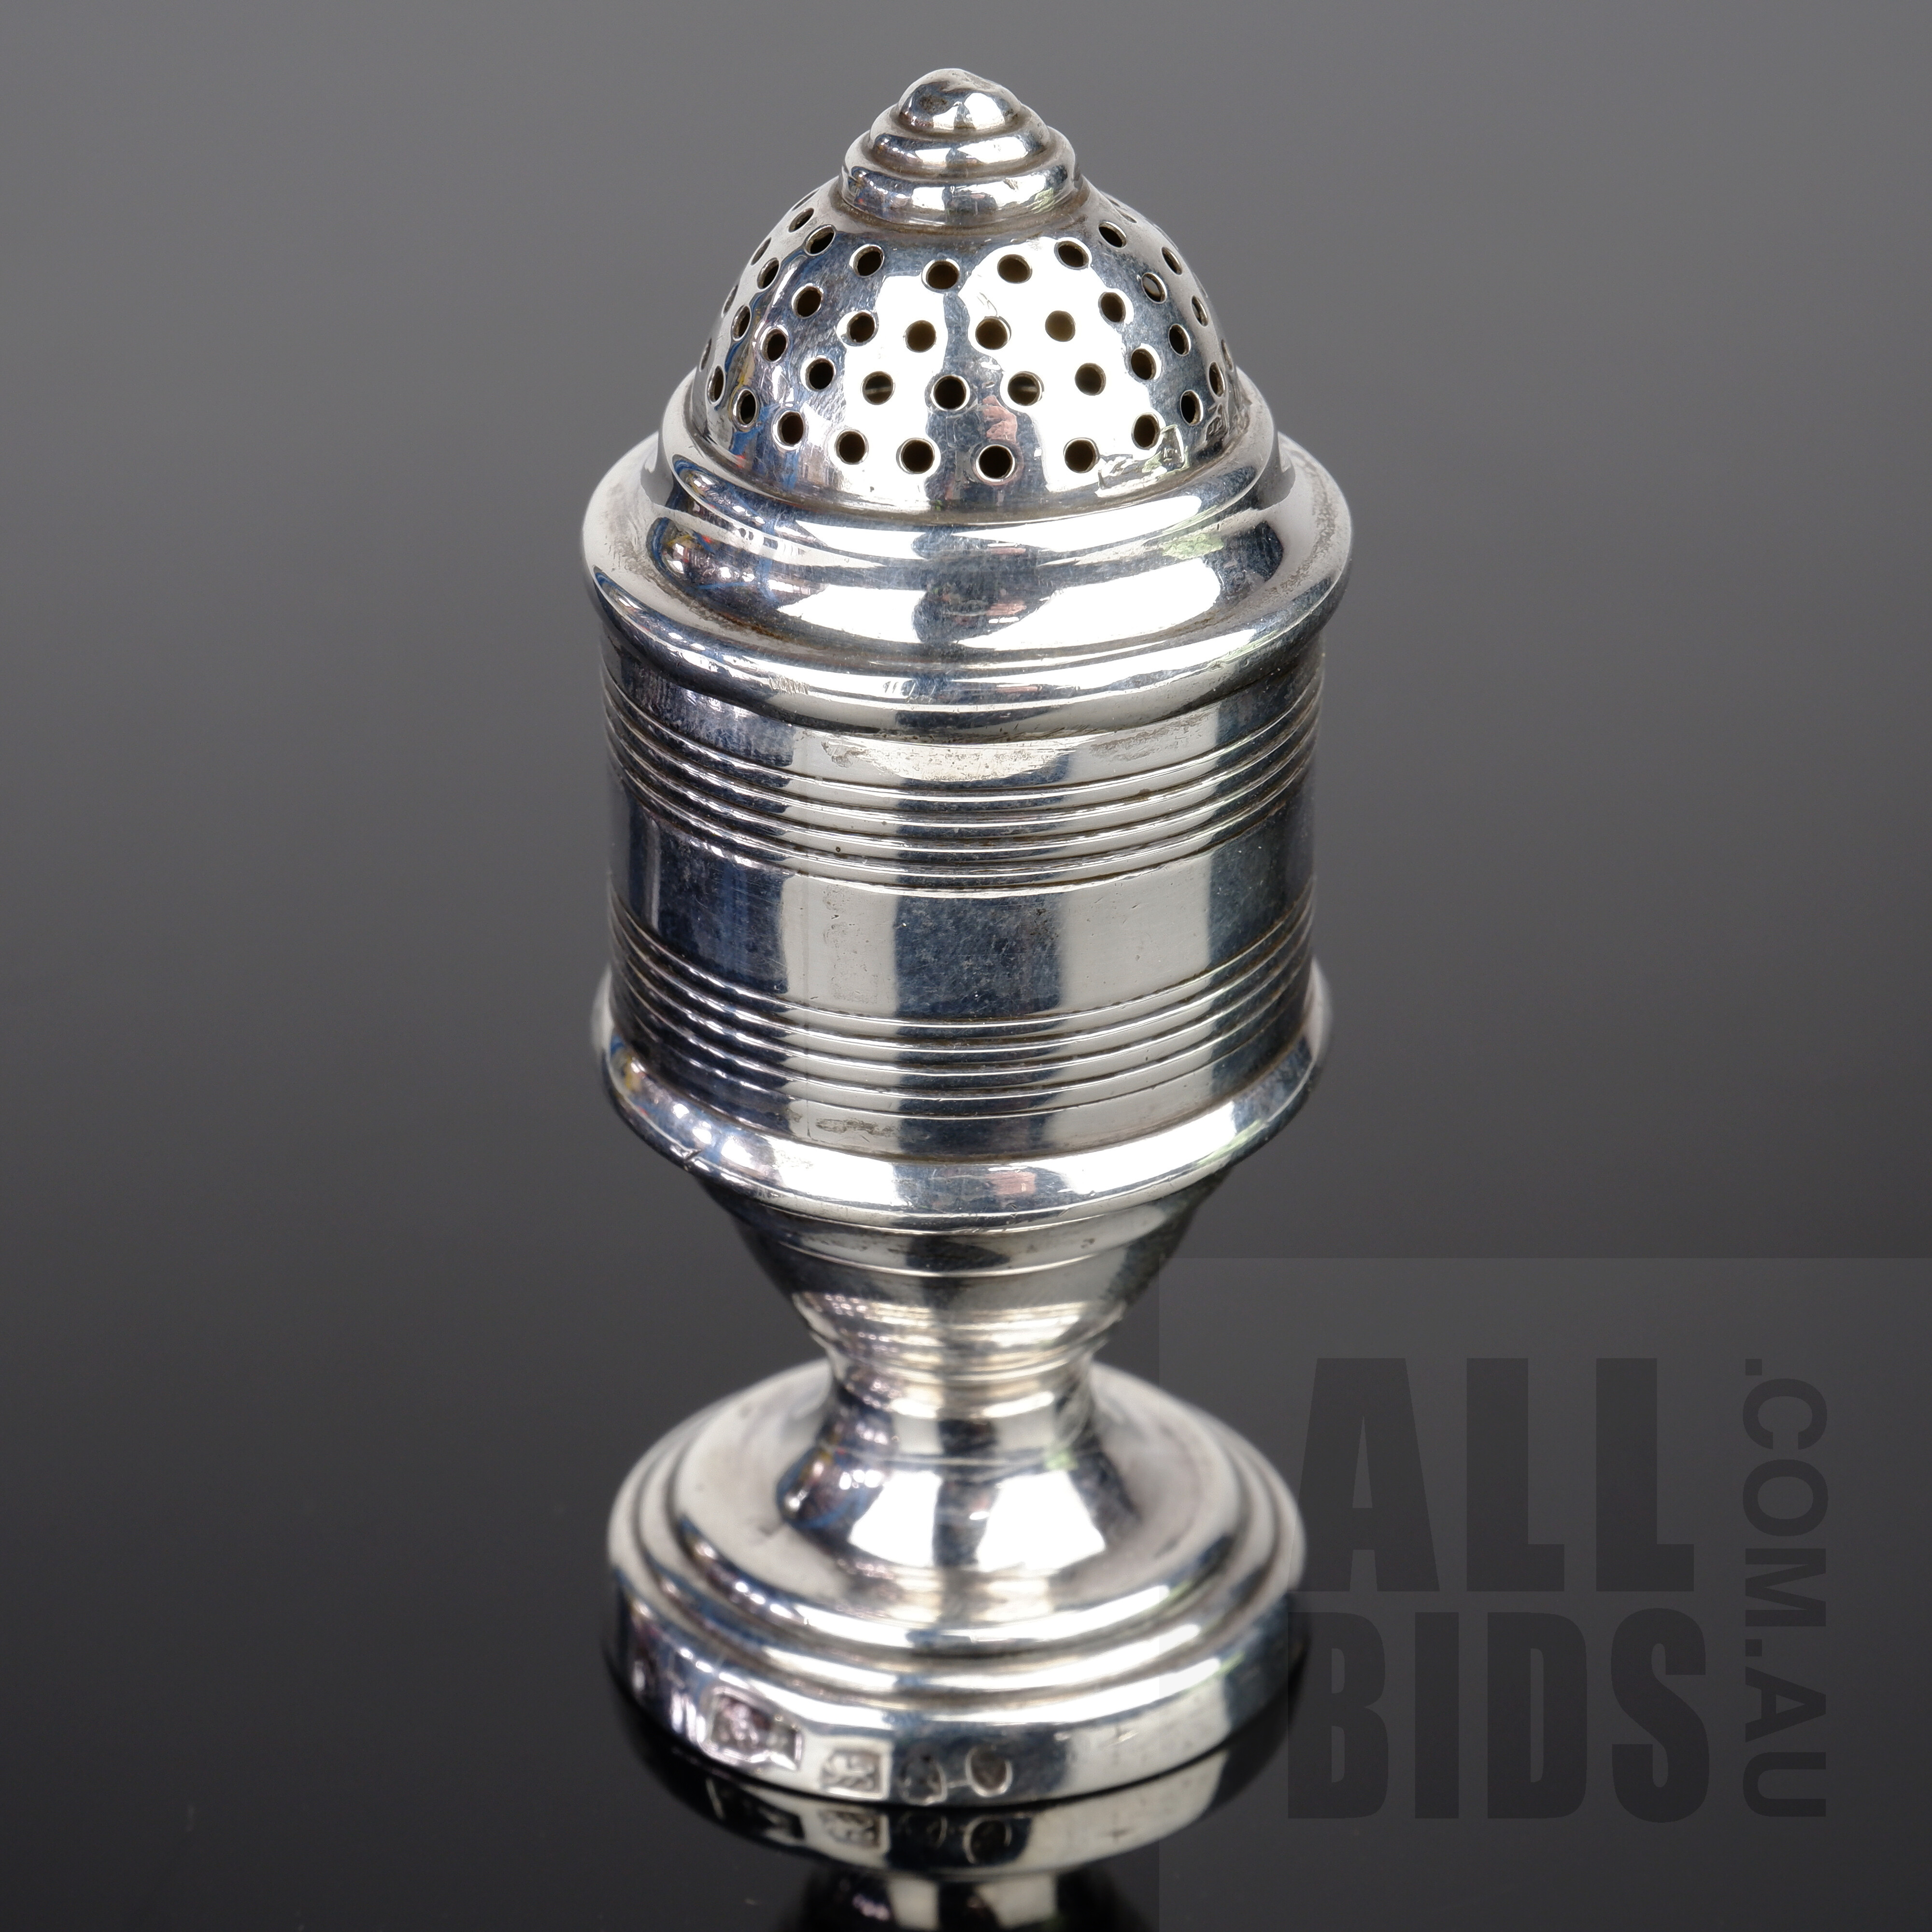 'Good George IV Sterling Silver Pepper Pot with 1821 Coronation Hallmark, Sheffield, 56g'